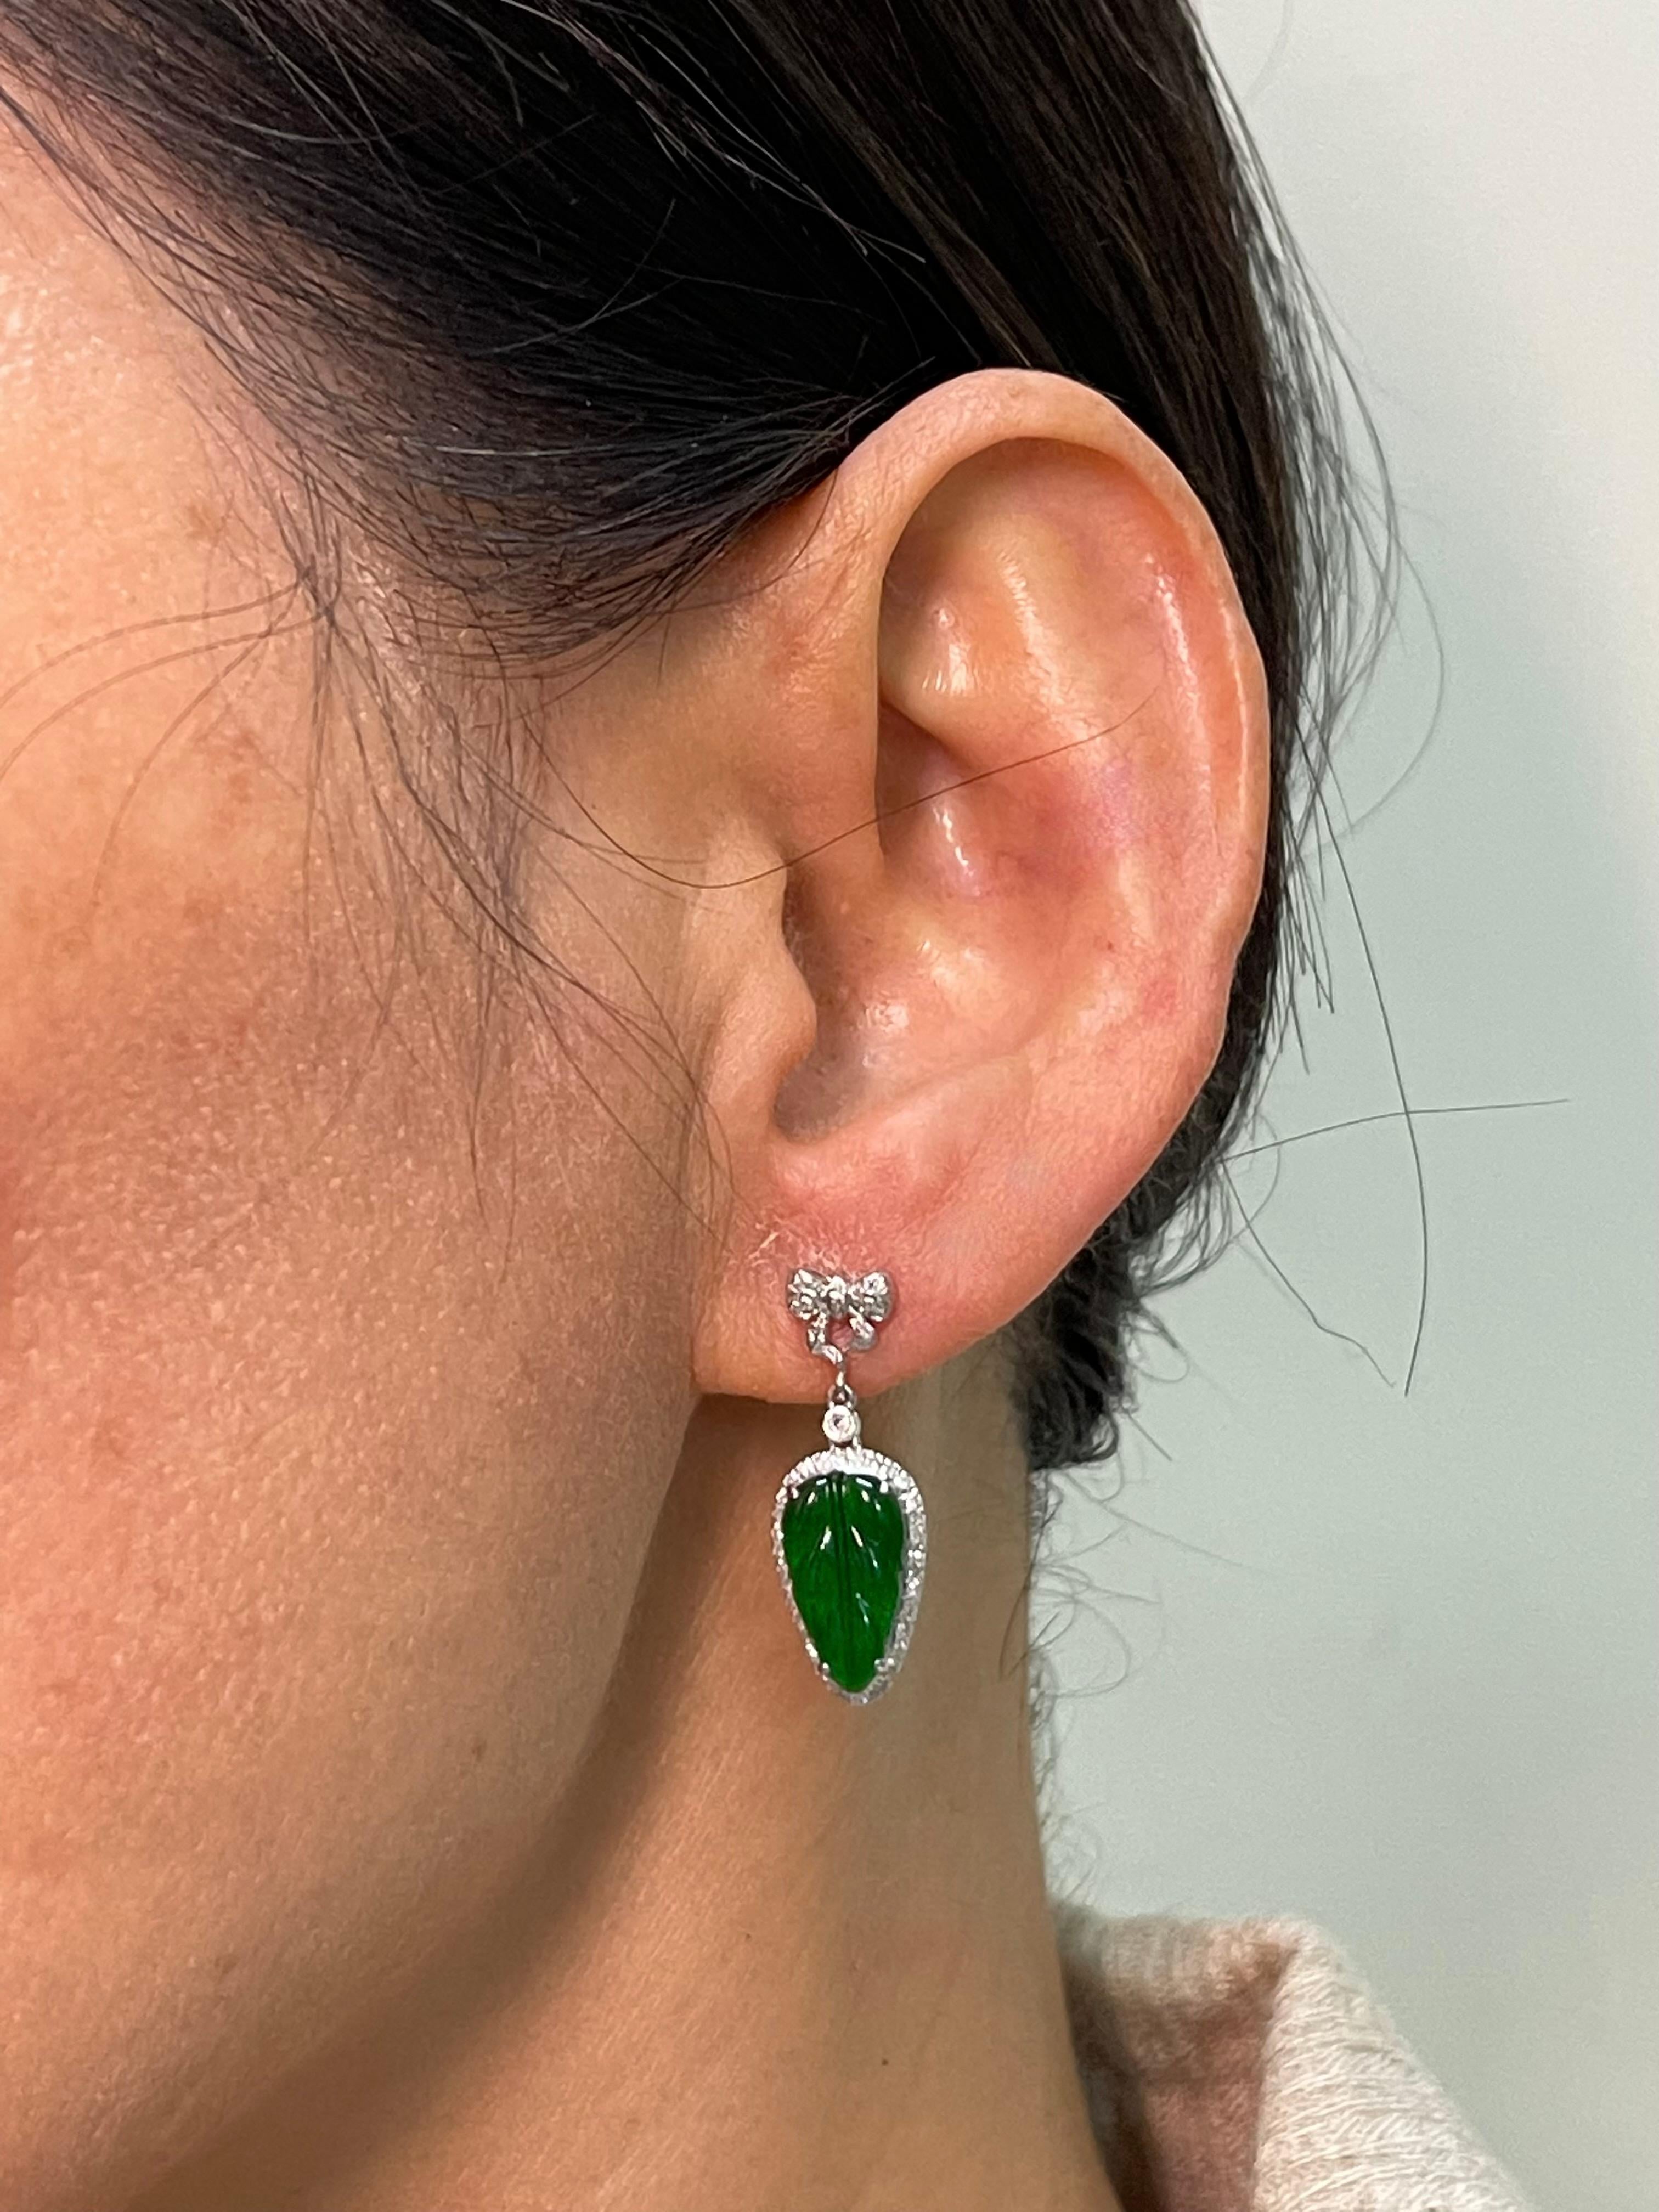 This is a very special pair of earrings. Made with the best imperial jade. They GLOW! The jade in these earrings are certified by 2 labs to be natural jadeite jade. The earrings are set in 18k white gold with posts backs. There are 2 carved imperial